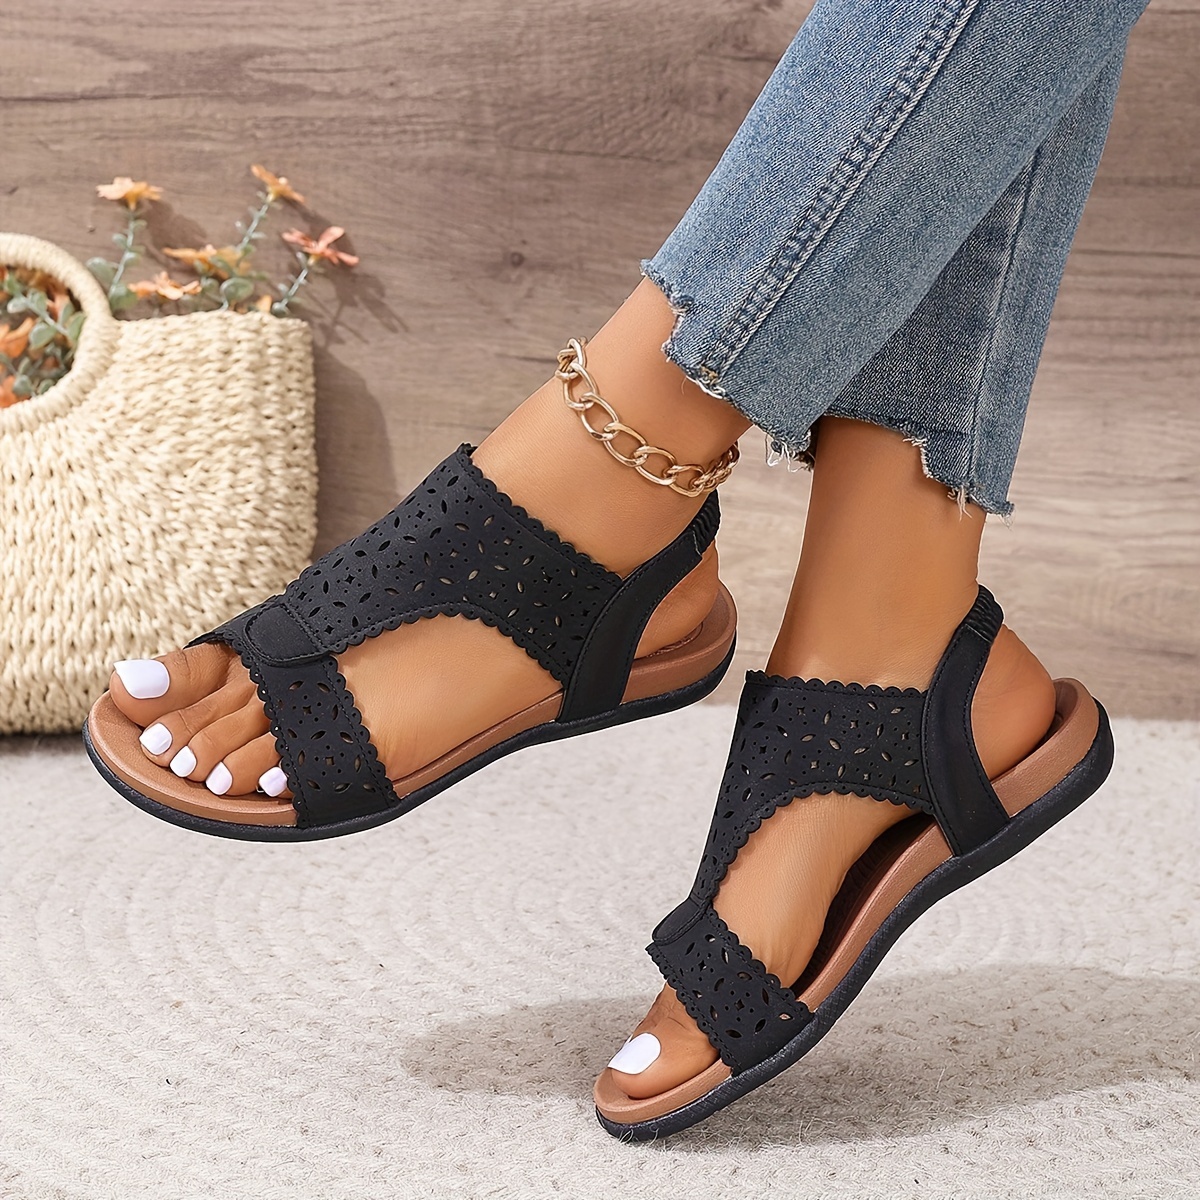 

Women's Cut-out Design Comfort Sandals, Durable Soft Sole Summer Casual Shoes With Elastic Back Strap, Breathable Beach Shoes